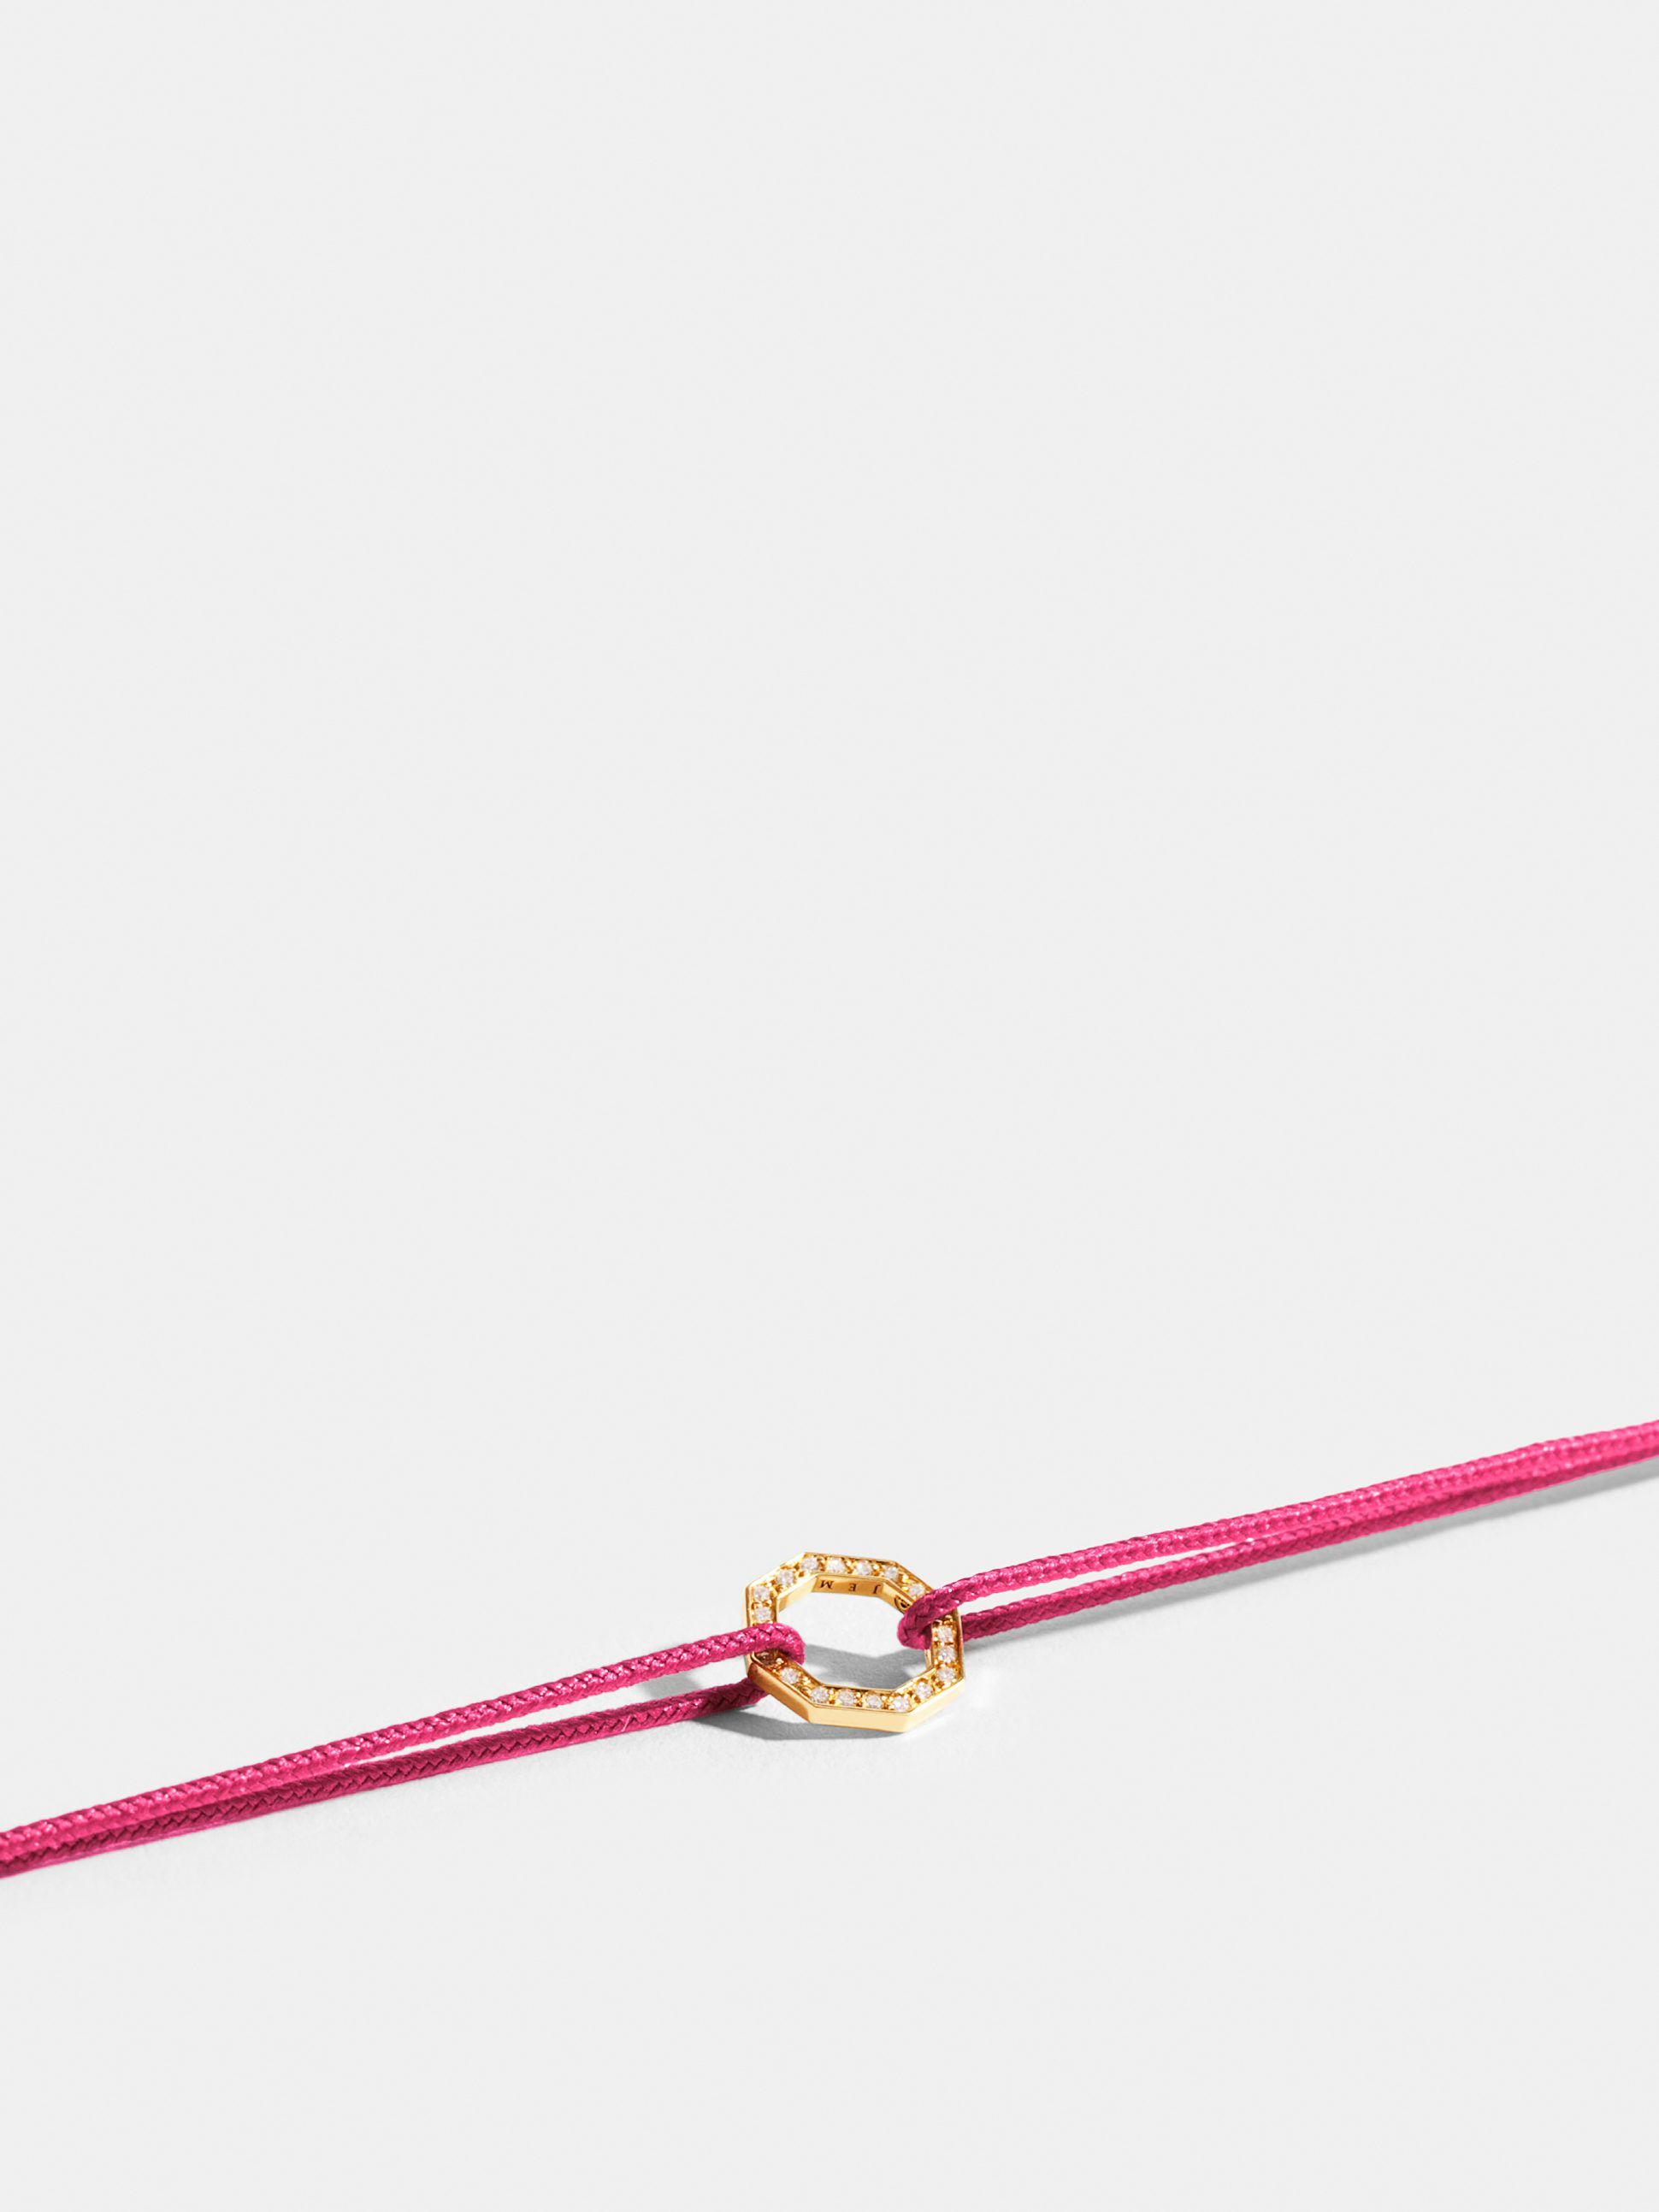 Octogone motif in 18k Fairmined ethical yellow gold, paved with lab-grown diamonds, on a fuschia pink cord.